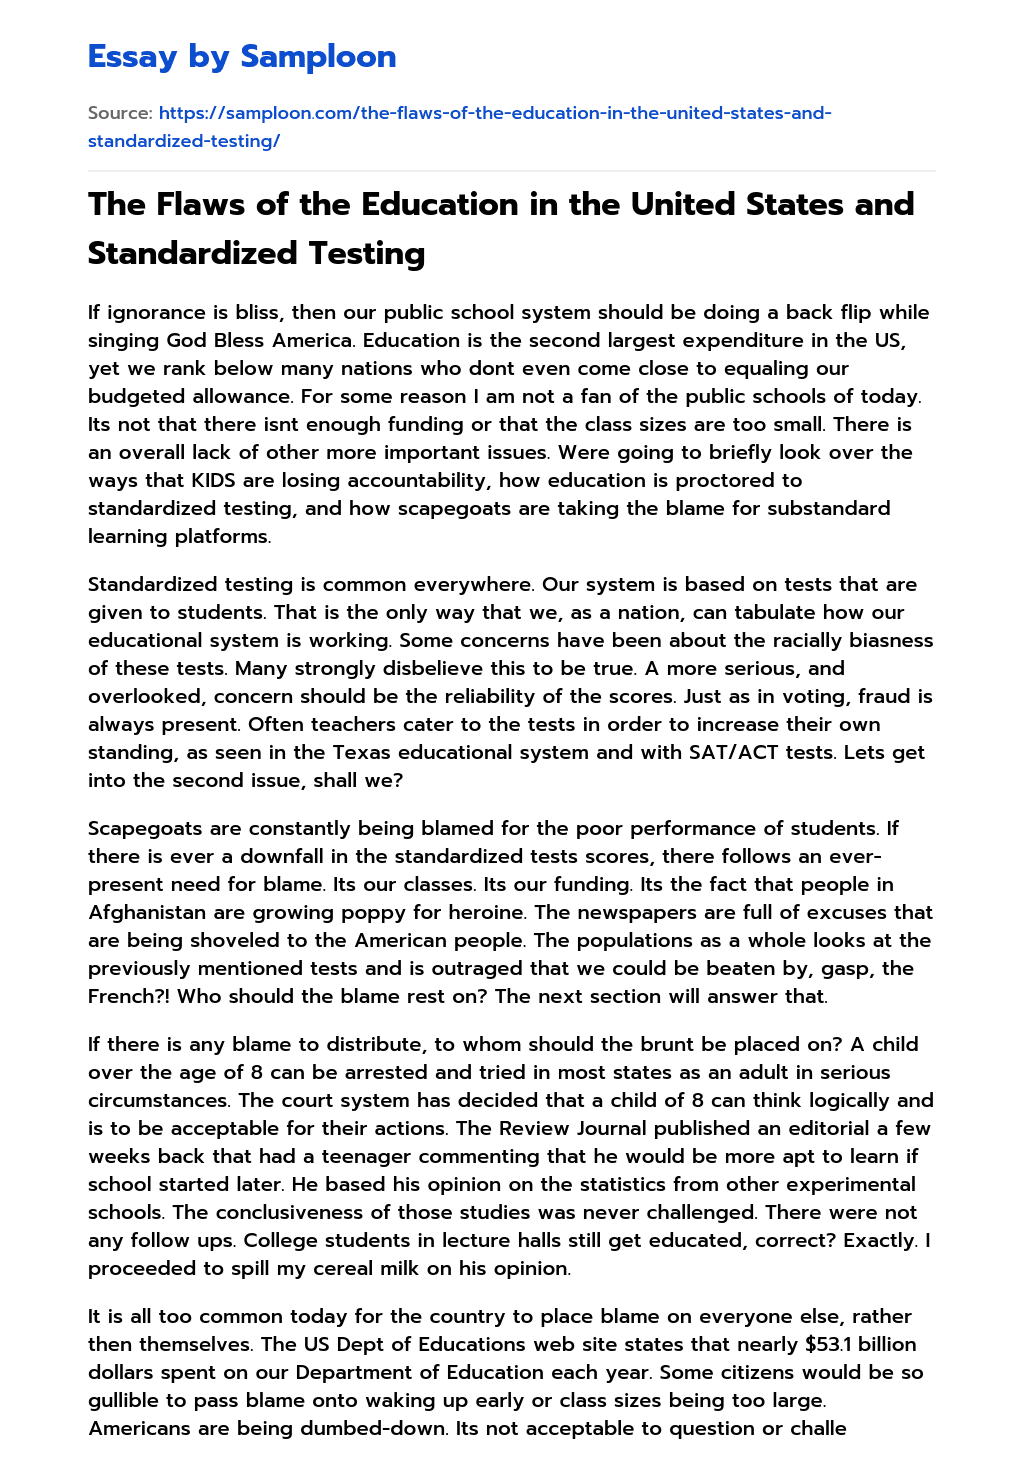 The Flaws of the Education in the United States and Standardized Testing essay